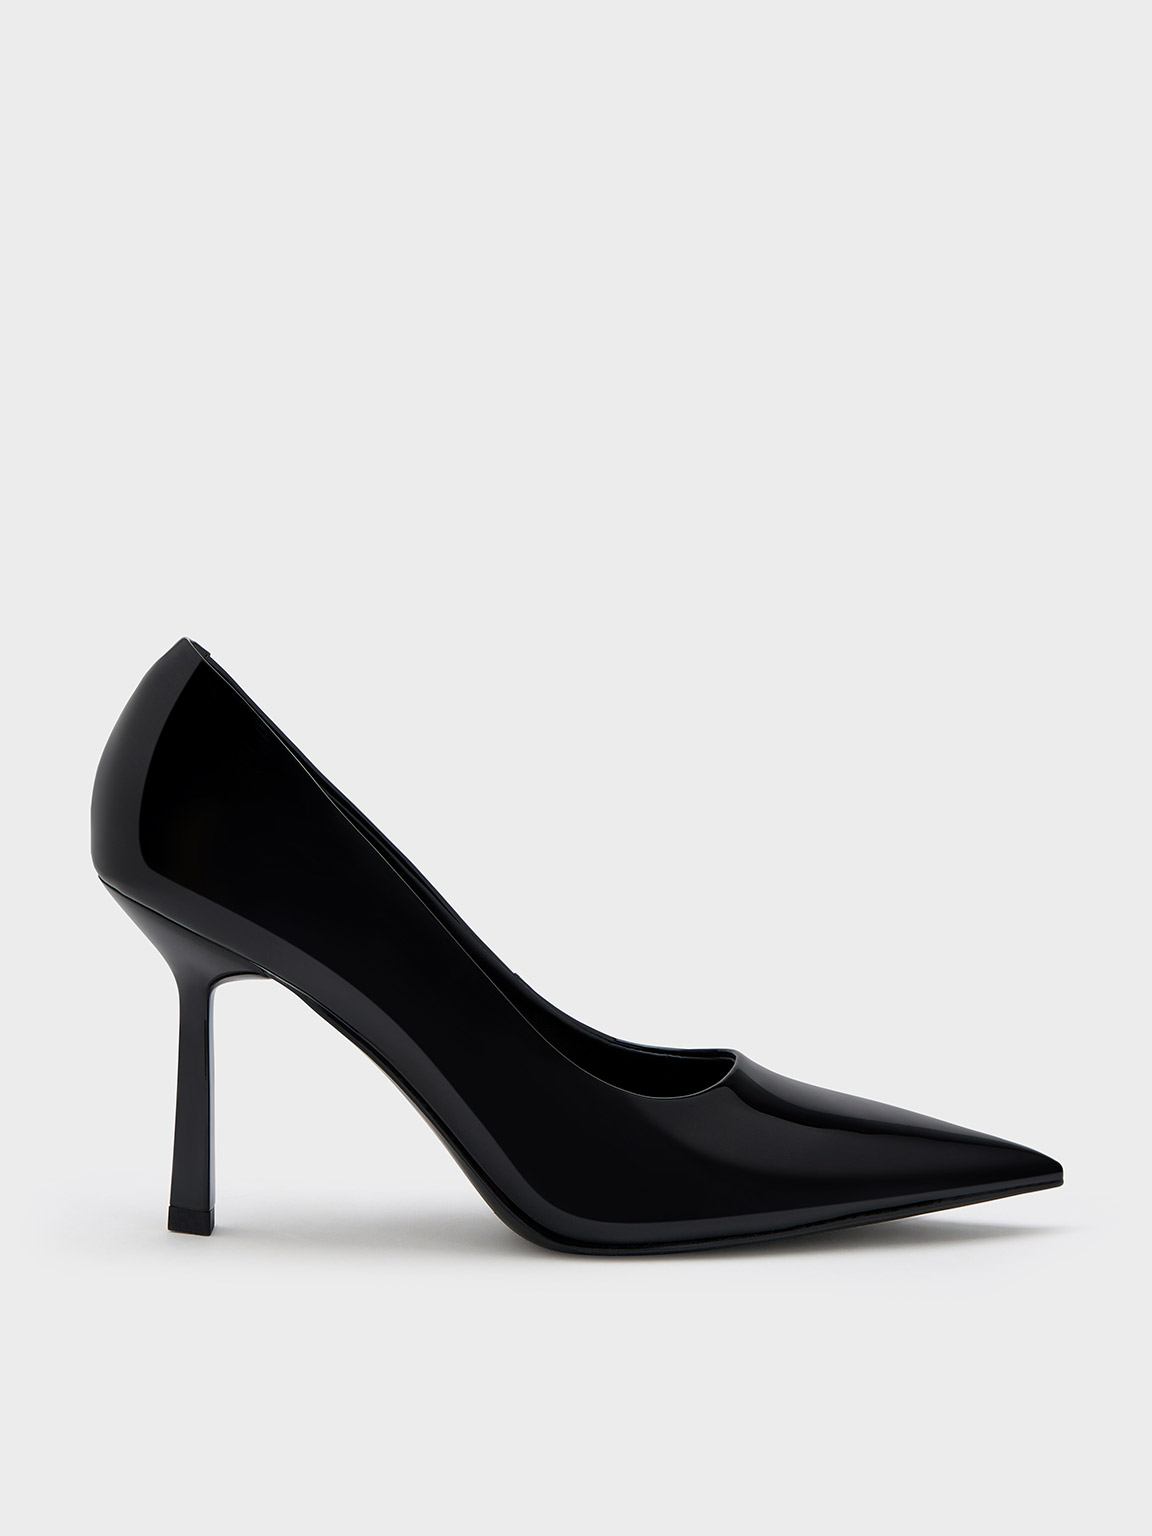 Patent Pointed-Toe Pumps